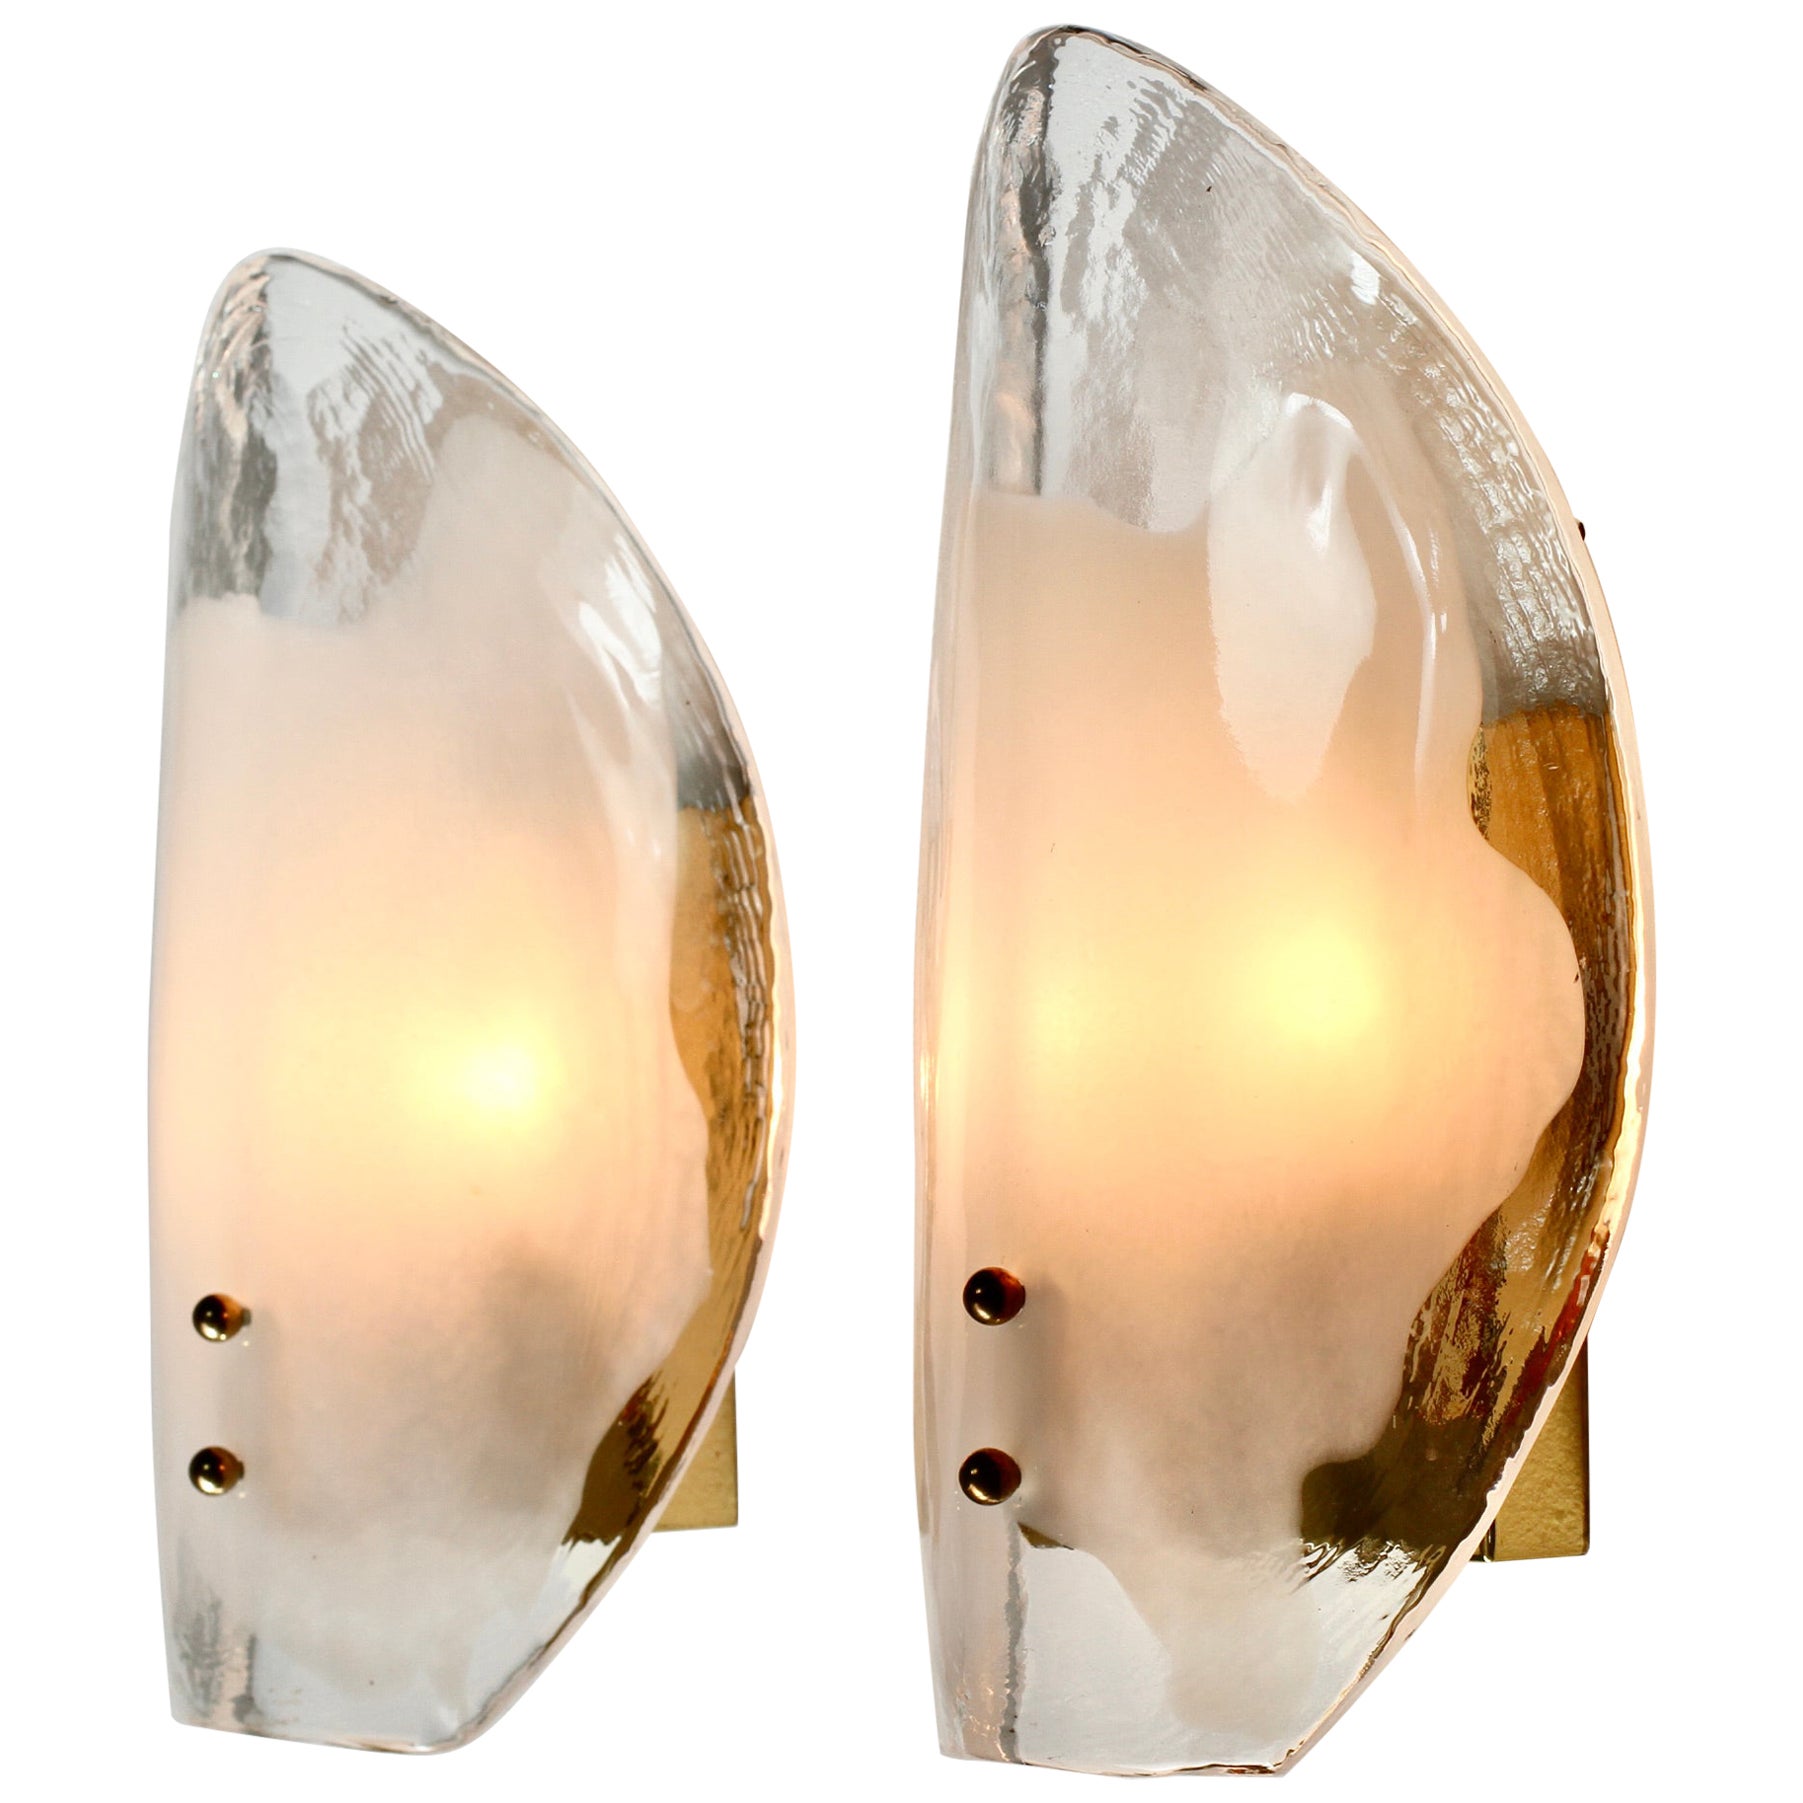 Midcentury Pair of Kalmar Mazzega Murano Glass Wall Lights or Sconces, 1970s For Sale